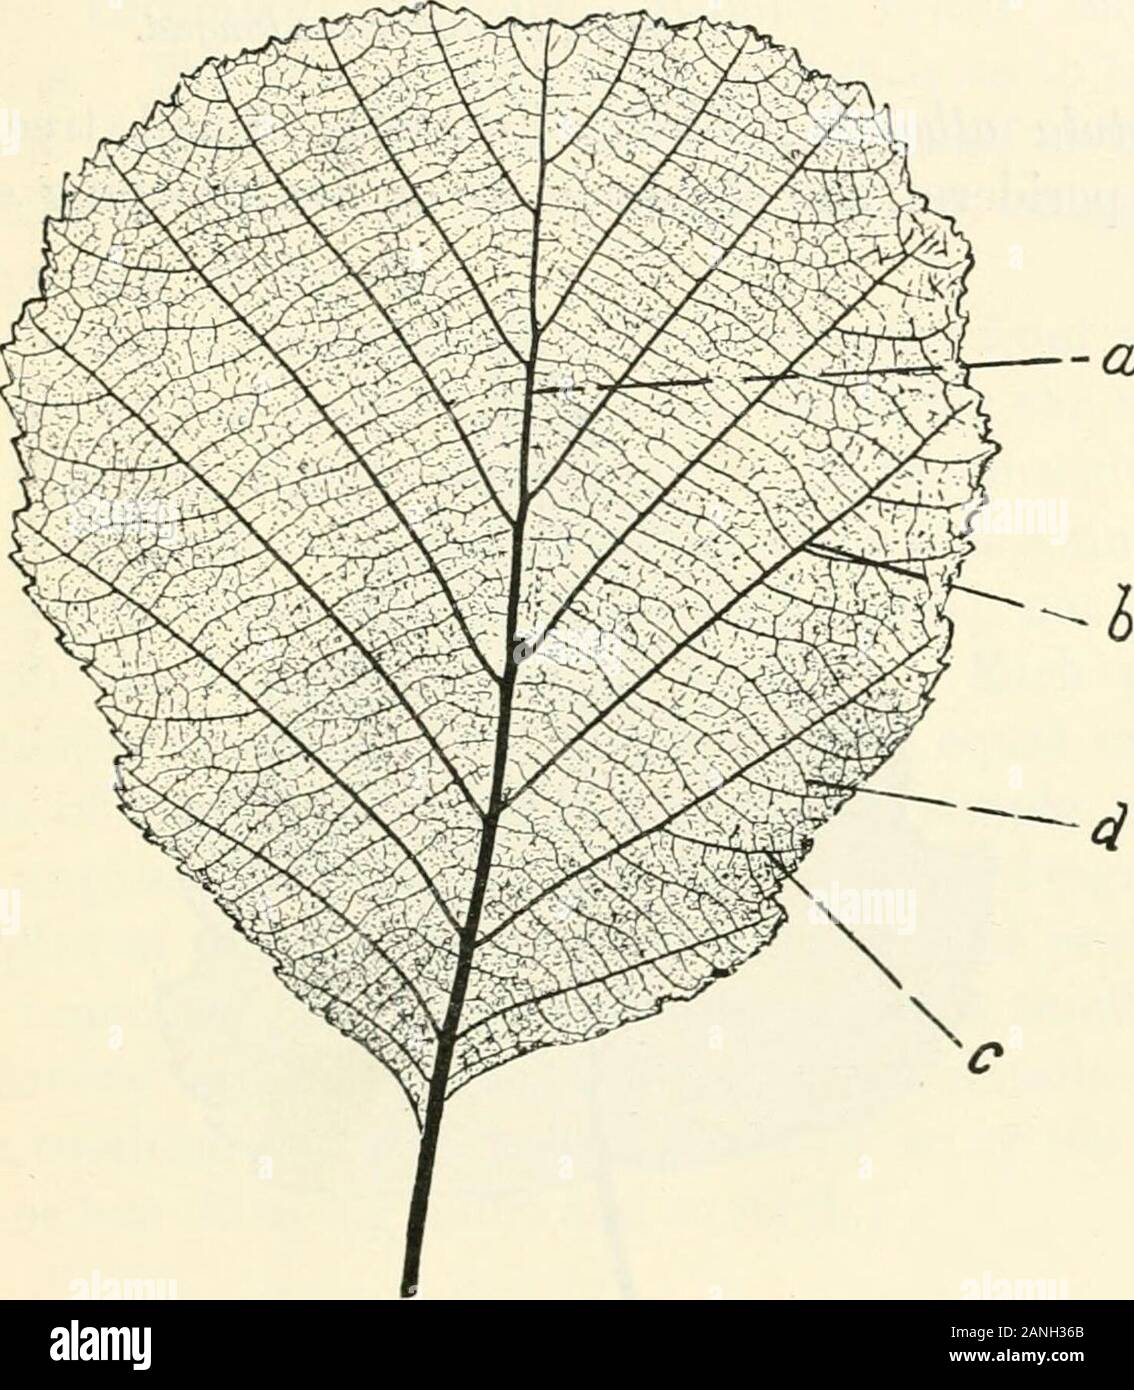 Trees; a handbook of forest-botany for the woodlands and the laboratory . s, the lowerthe shortest. Alnus glutinosa, Gaertn. Alder (Fig. 93). Mediumtree with trigonal shoots, stalked buds, and dark shiningfoliage in ^ spiral. Leaf about 4—9 x 3—7 cm. (4—10 x3—9), rounded, broadly obovate, or nearly obcordate, toorbicular-cuneate, ovate-elliptic or sub-orbicular; obtuse,truncate, or slightly refuse at apex, and with cuneiformbase; irregularly sinuous or slightly lobed and bi-serrateor dentate, or nearly entire below. Glabrous and deepshining green above, and more or less viscous, hardly paler,f Stock Photo